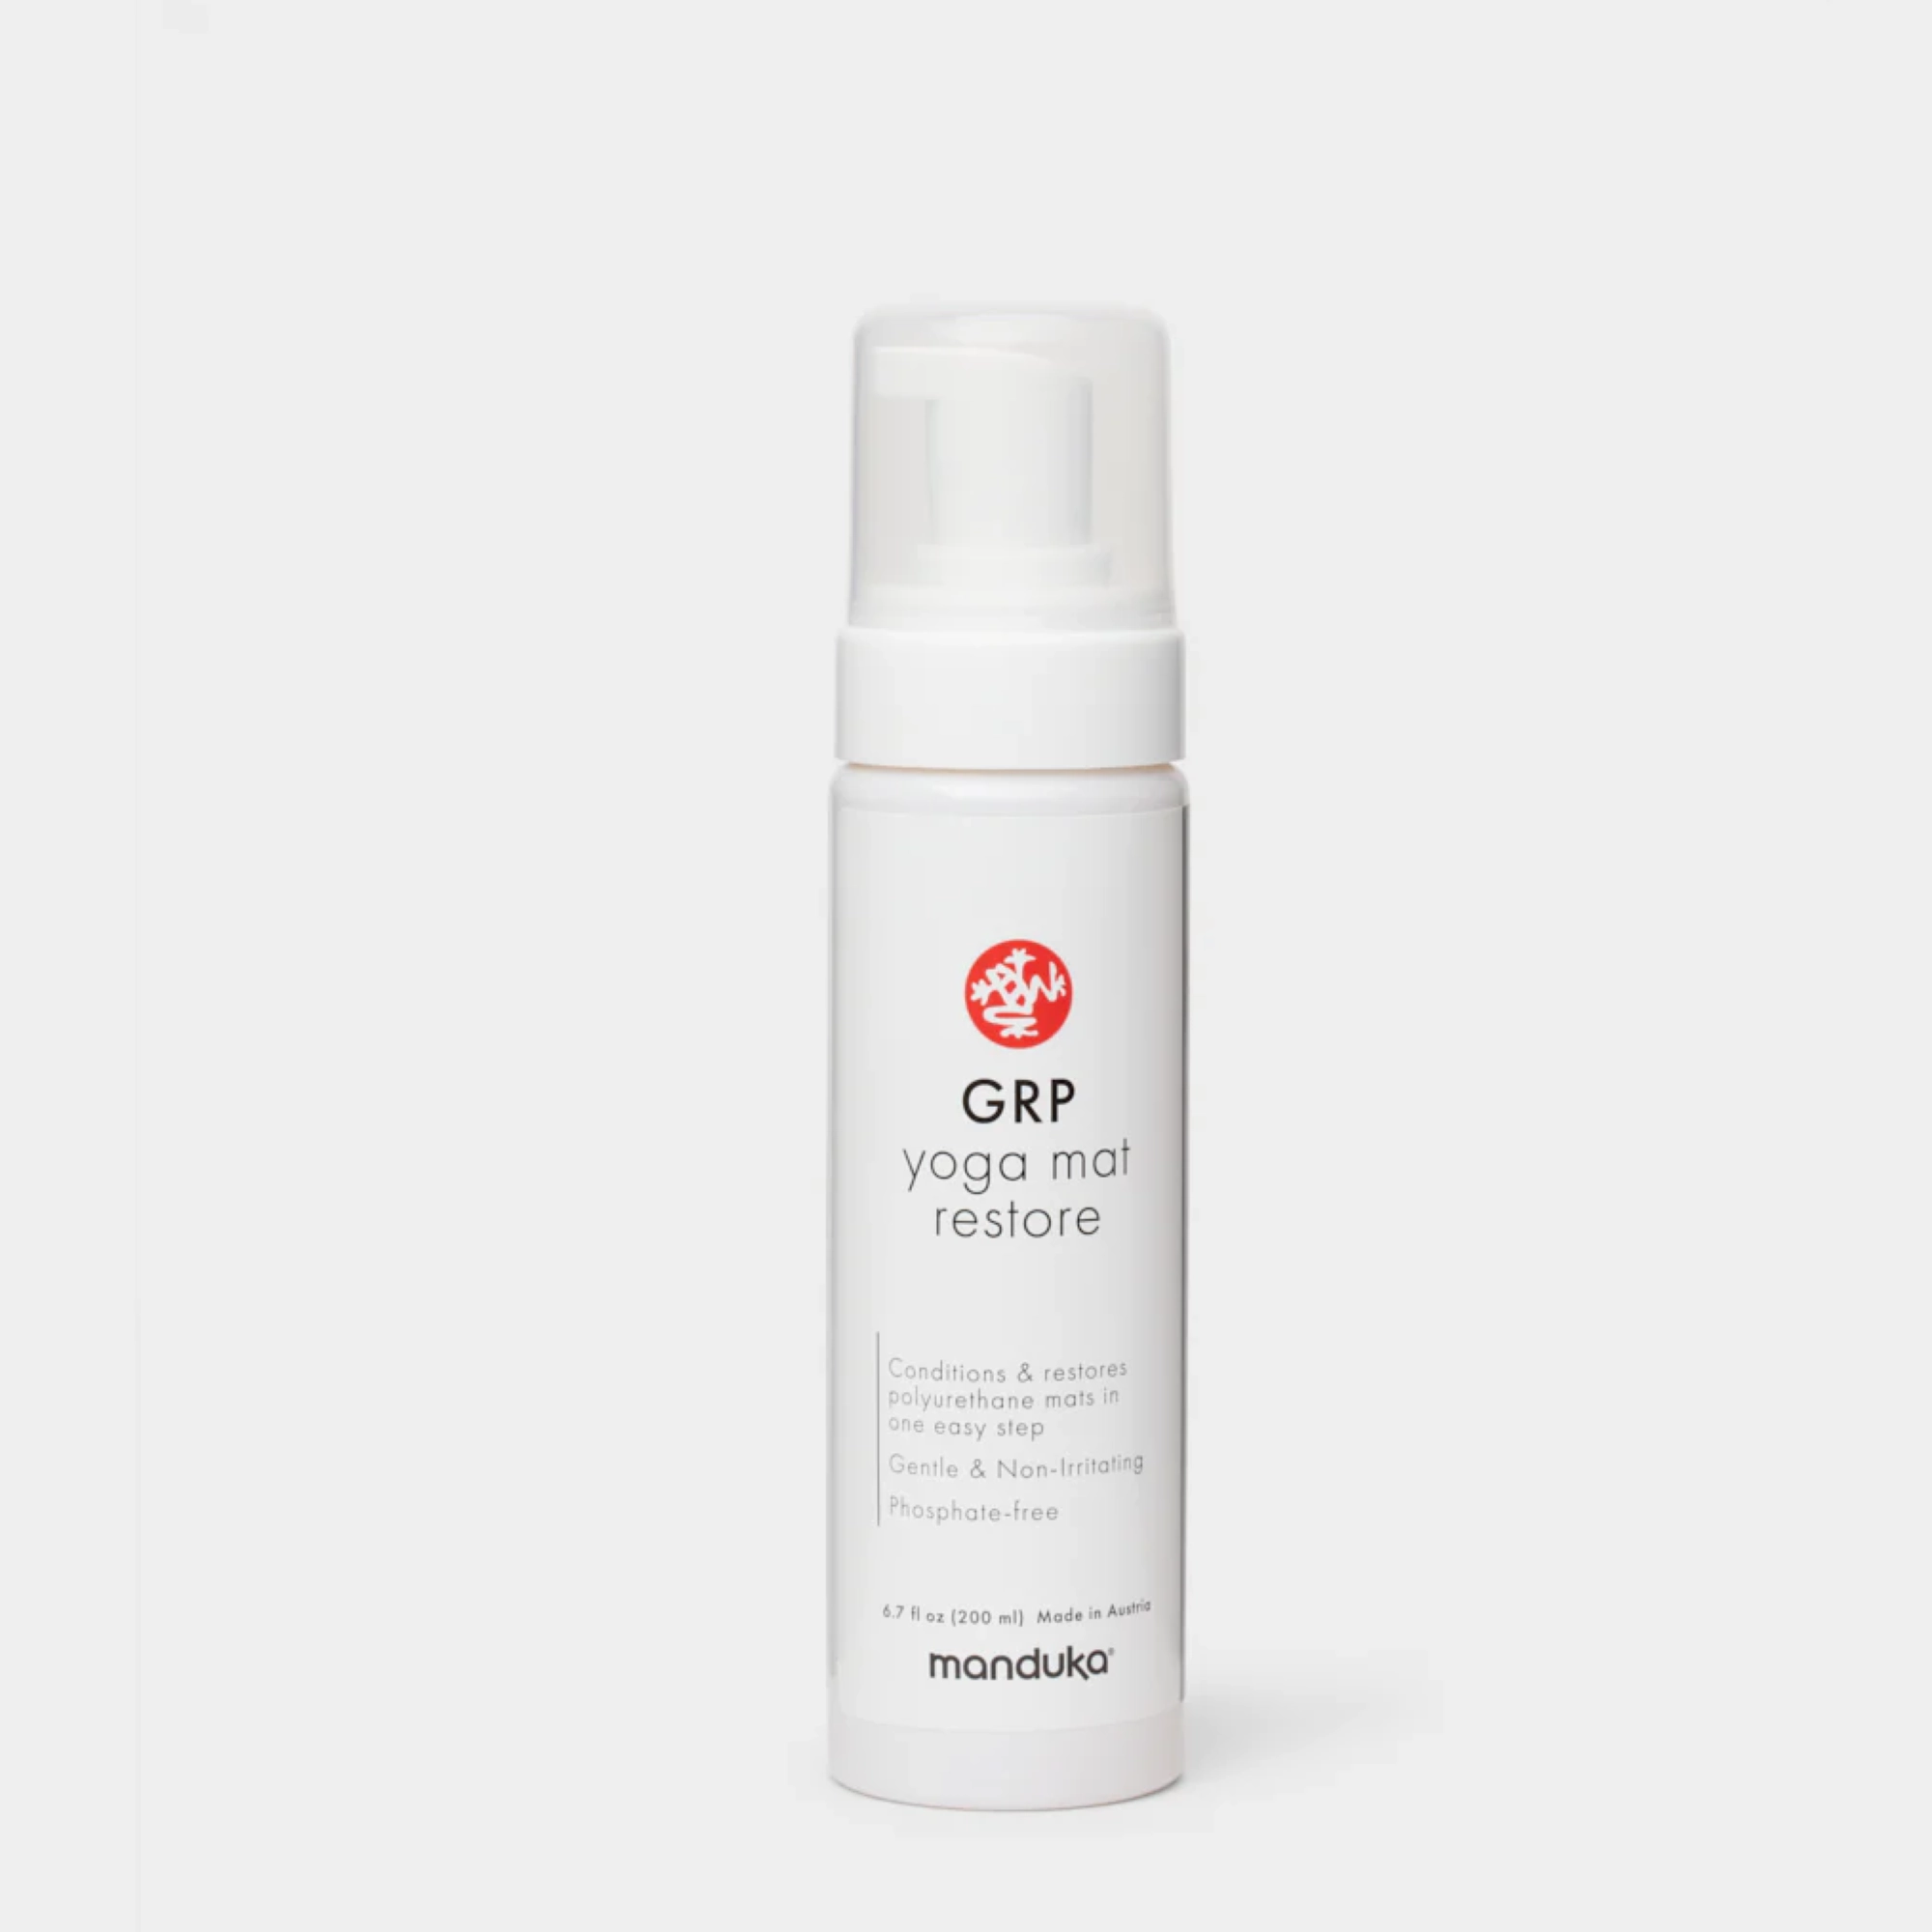 Increase Grip on Your Cork Yoga Mat - Revive Grip Spray